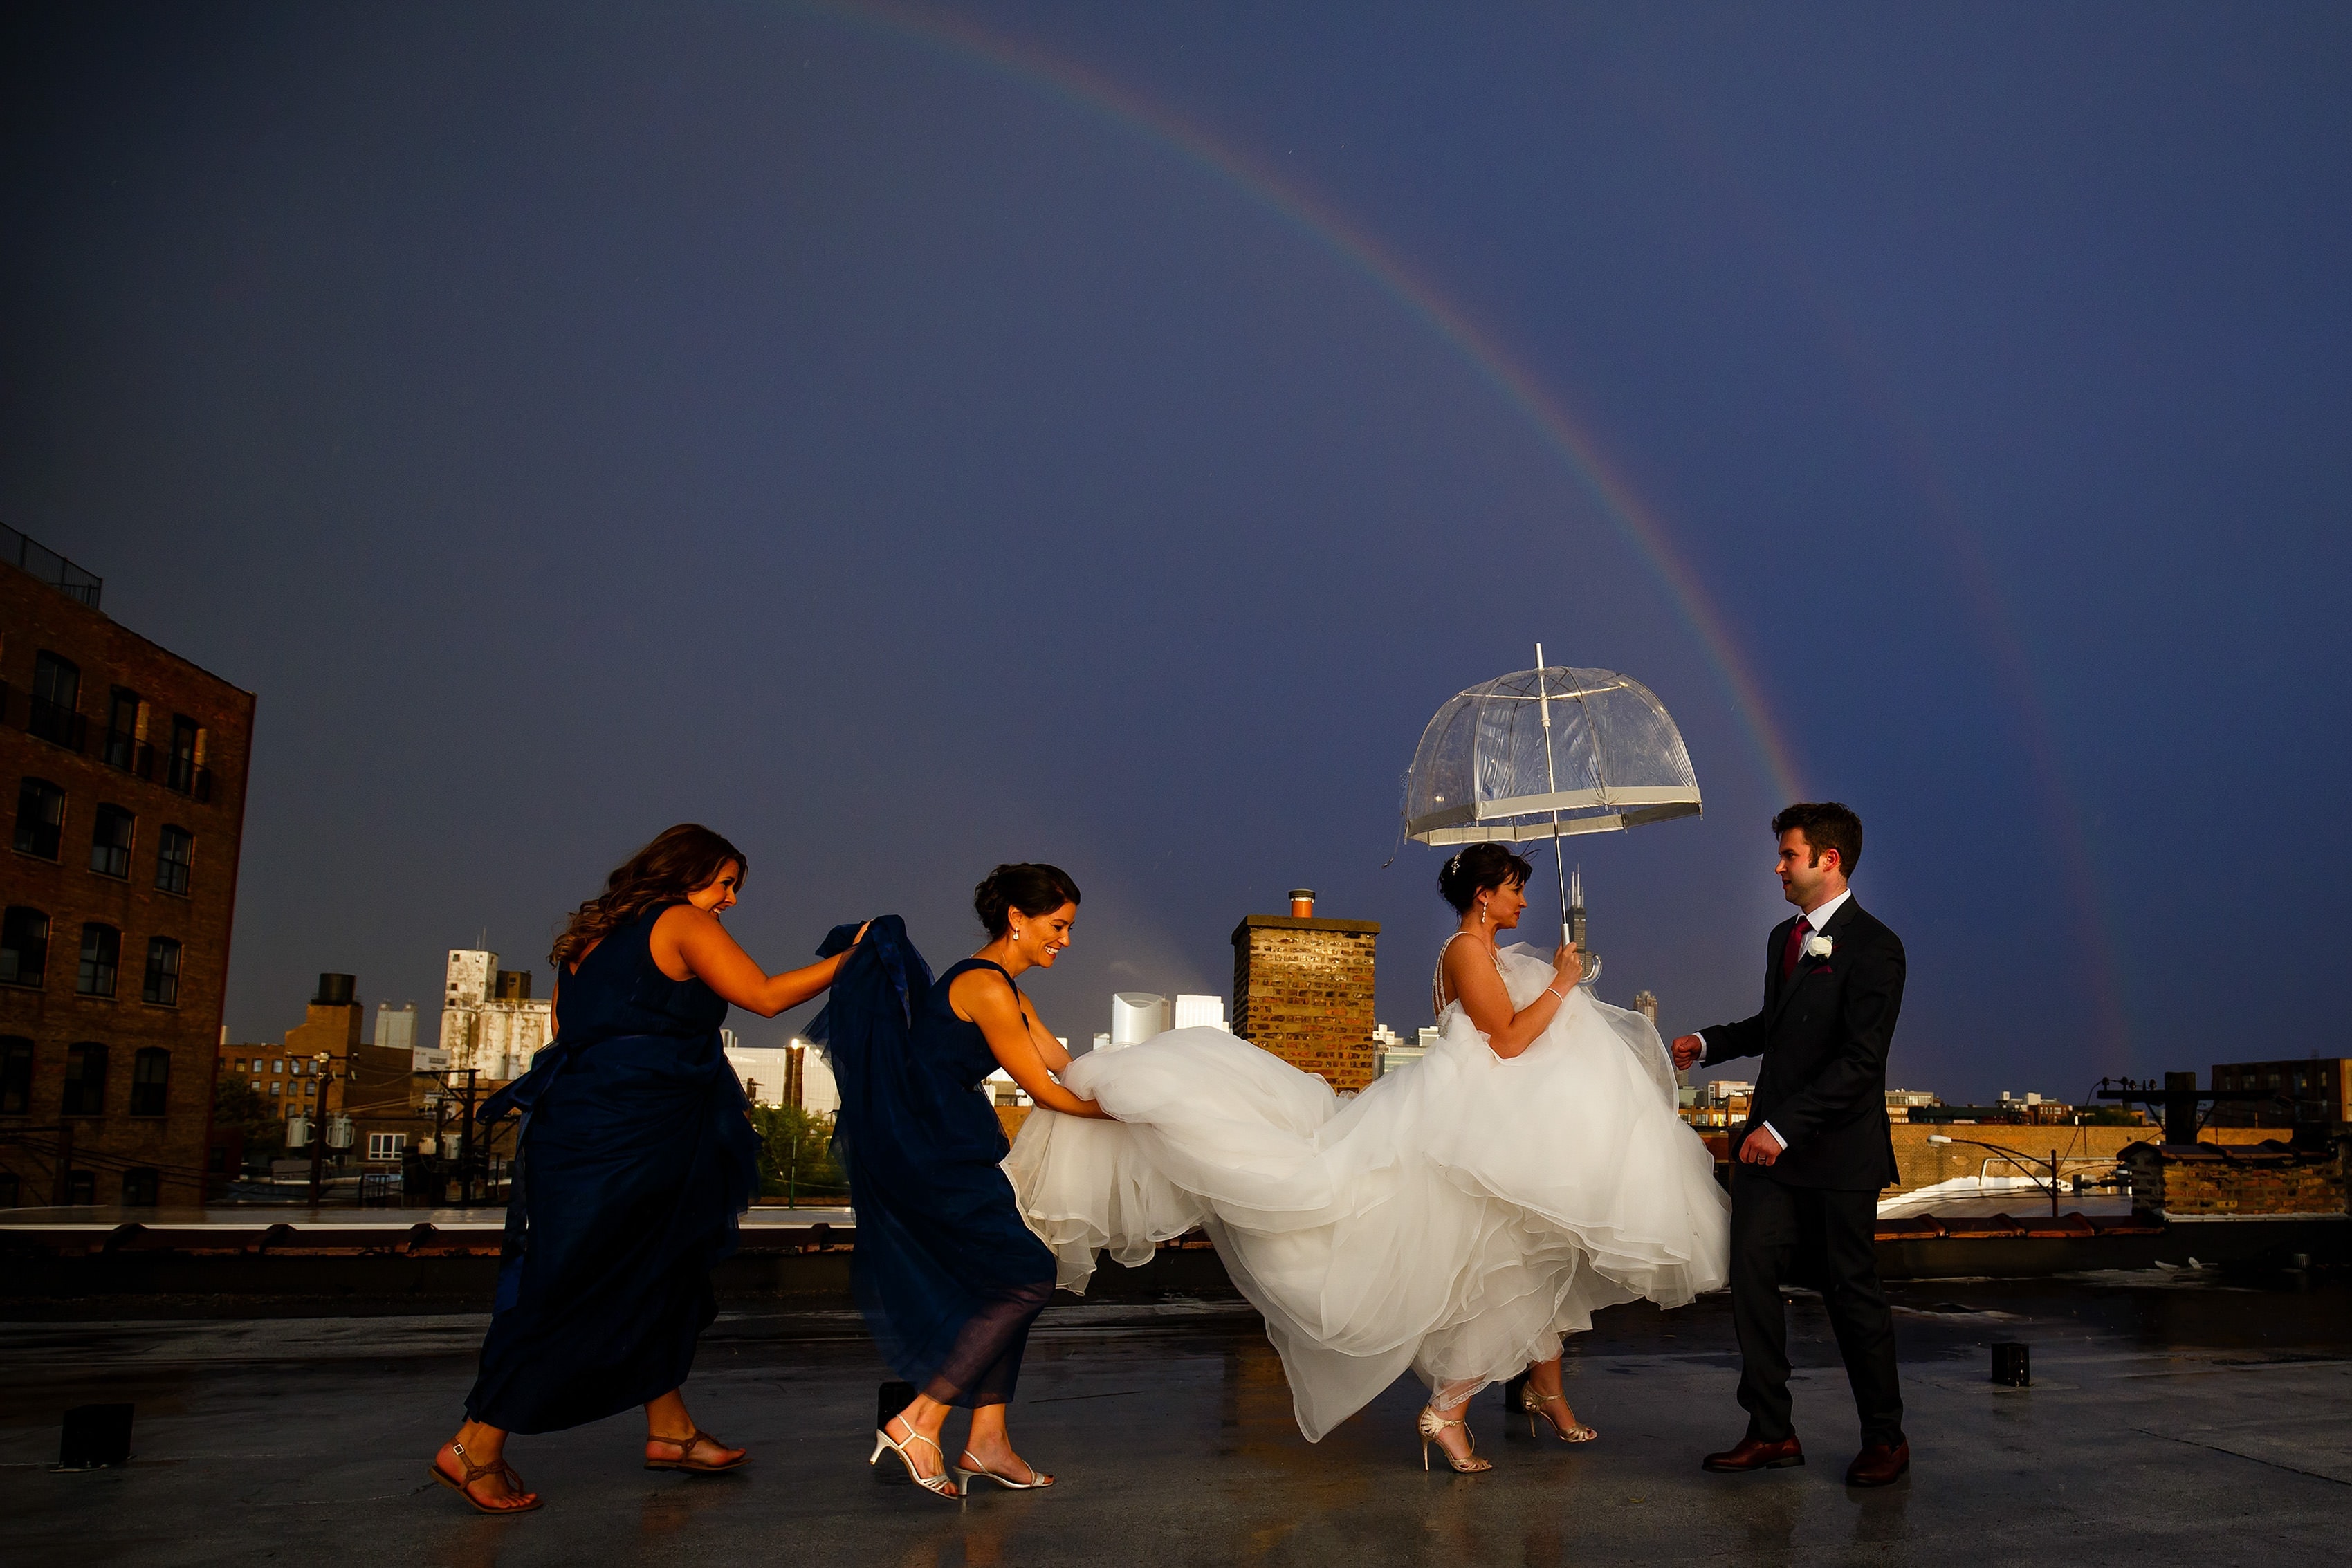 Chelsea gets some help with her dress on the rooftop above Room 1520 as rain falls and a rainbow is emerges in the sky